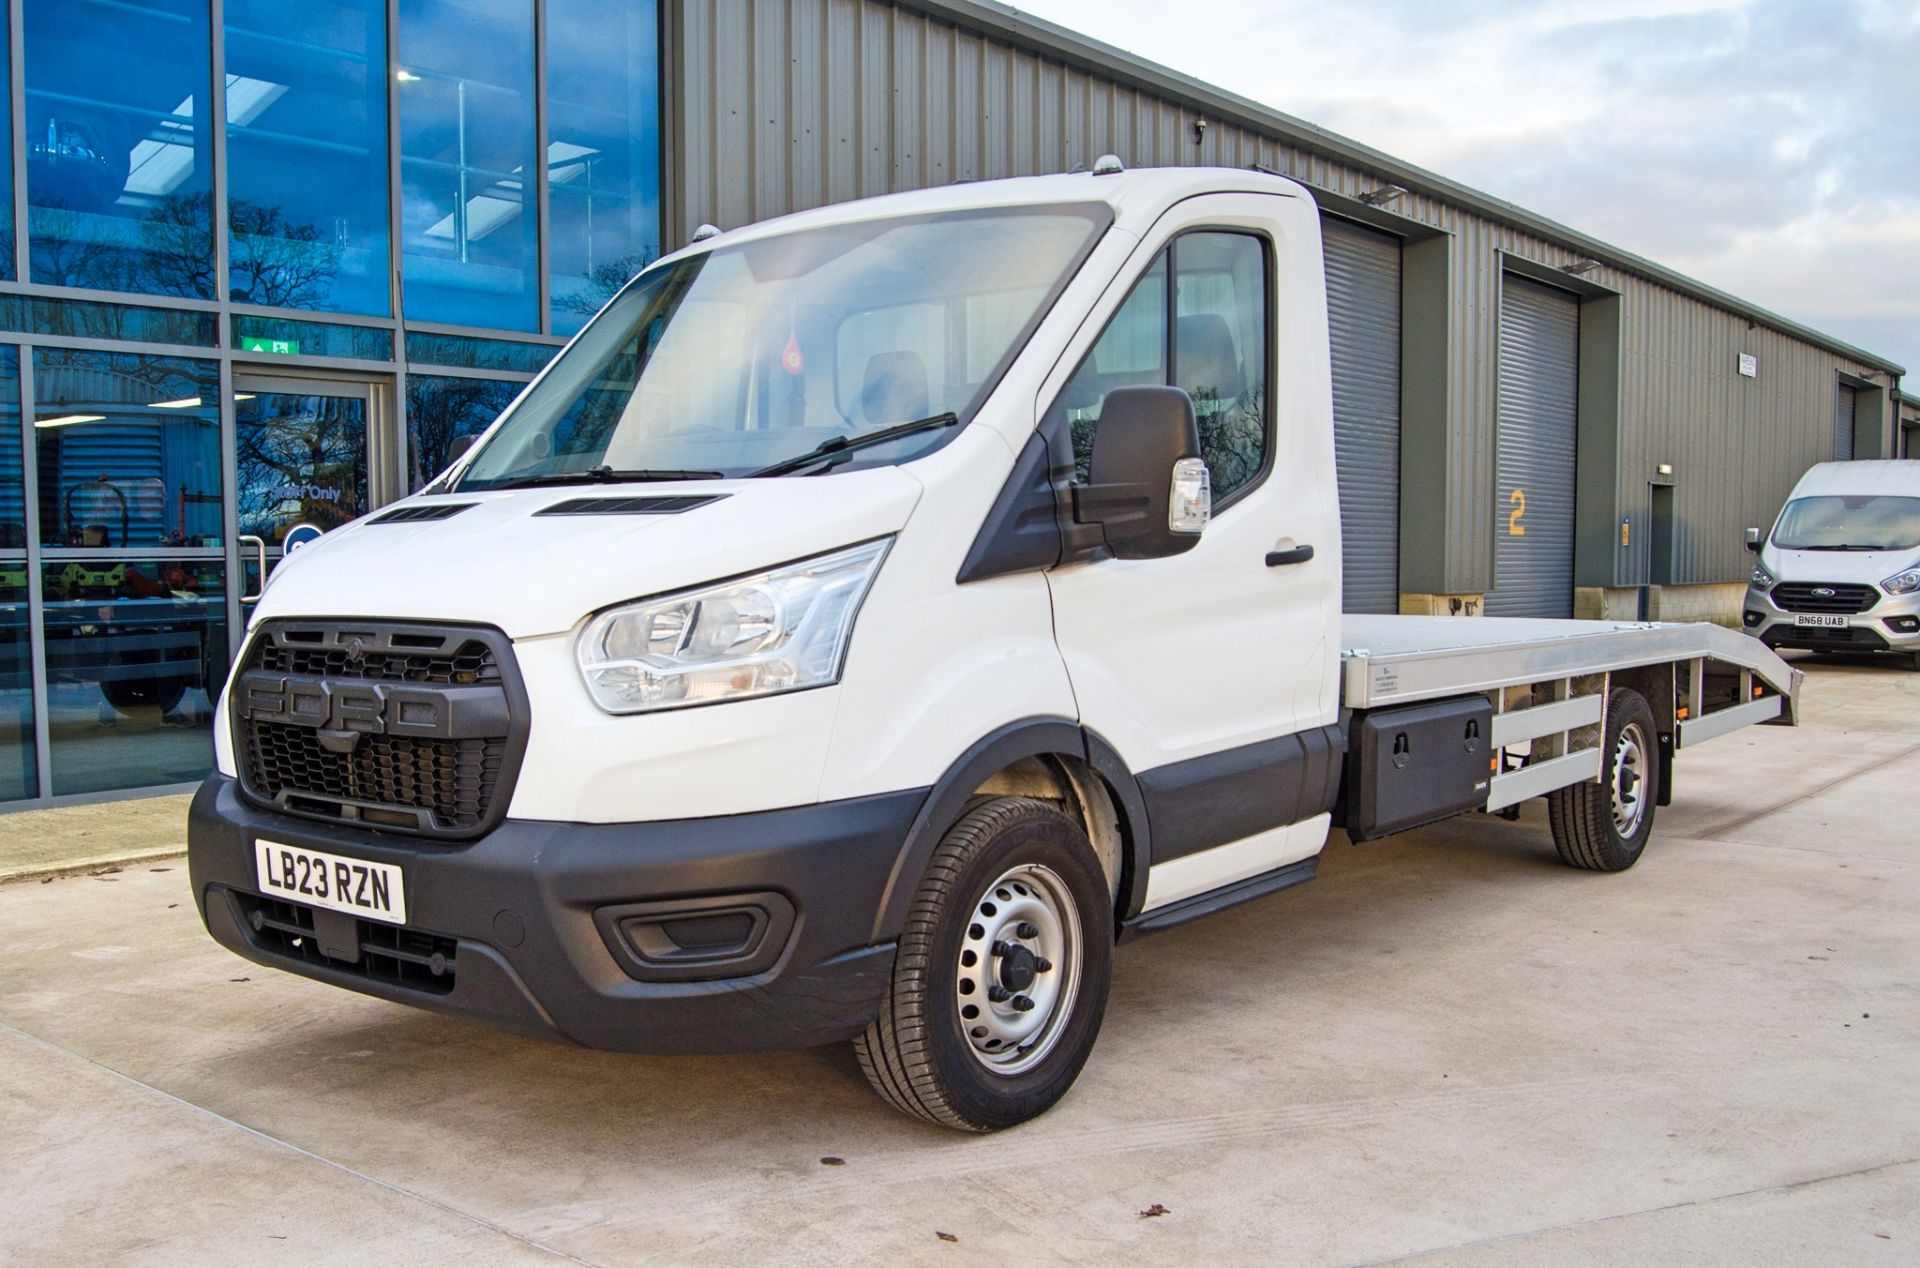 Ford Transit 350 Leader Ecoblue Euro 6 2 litre diesel 6 speed manual recovery truck Registration